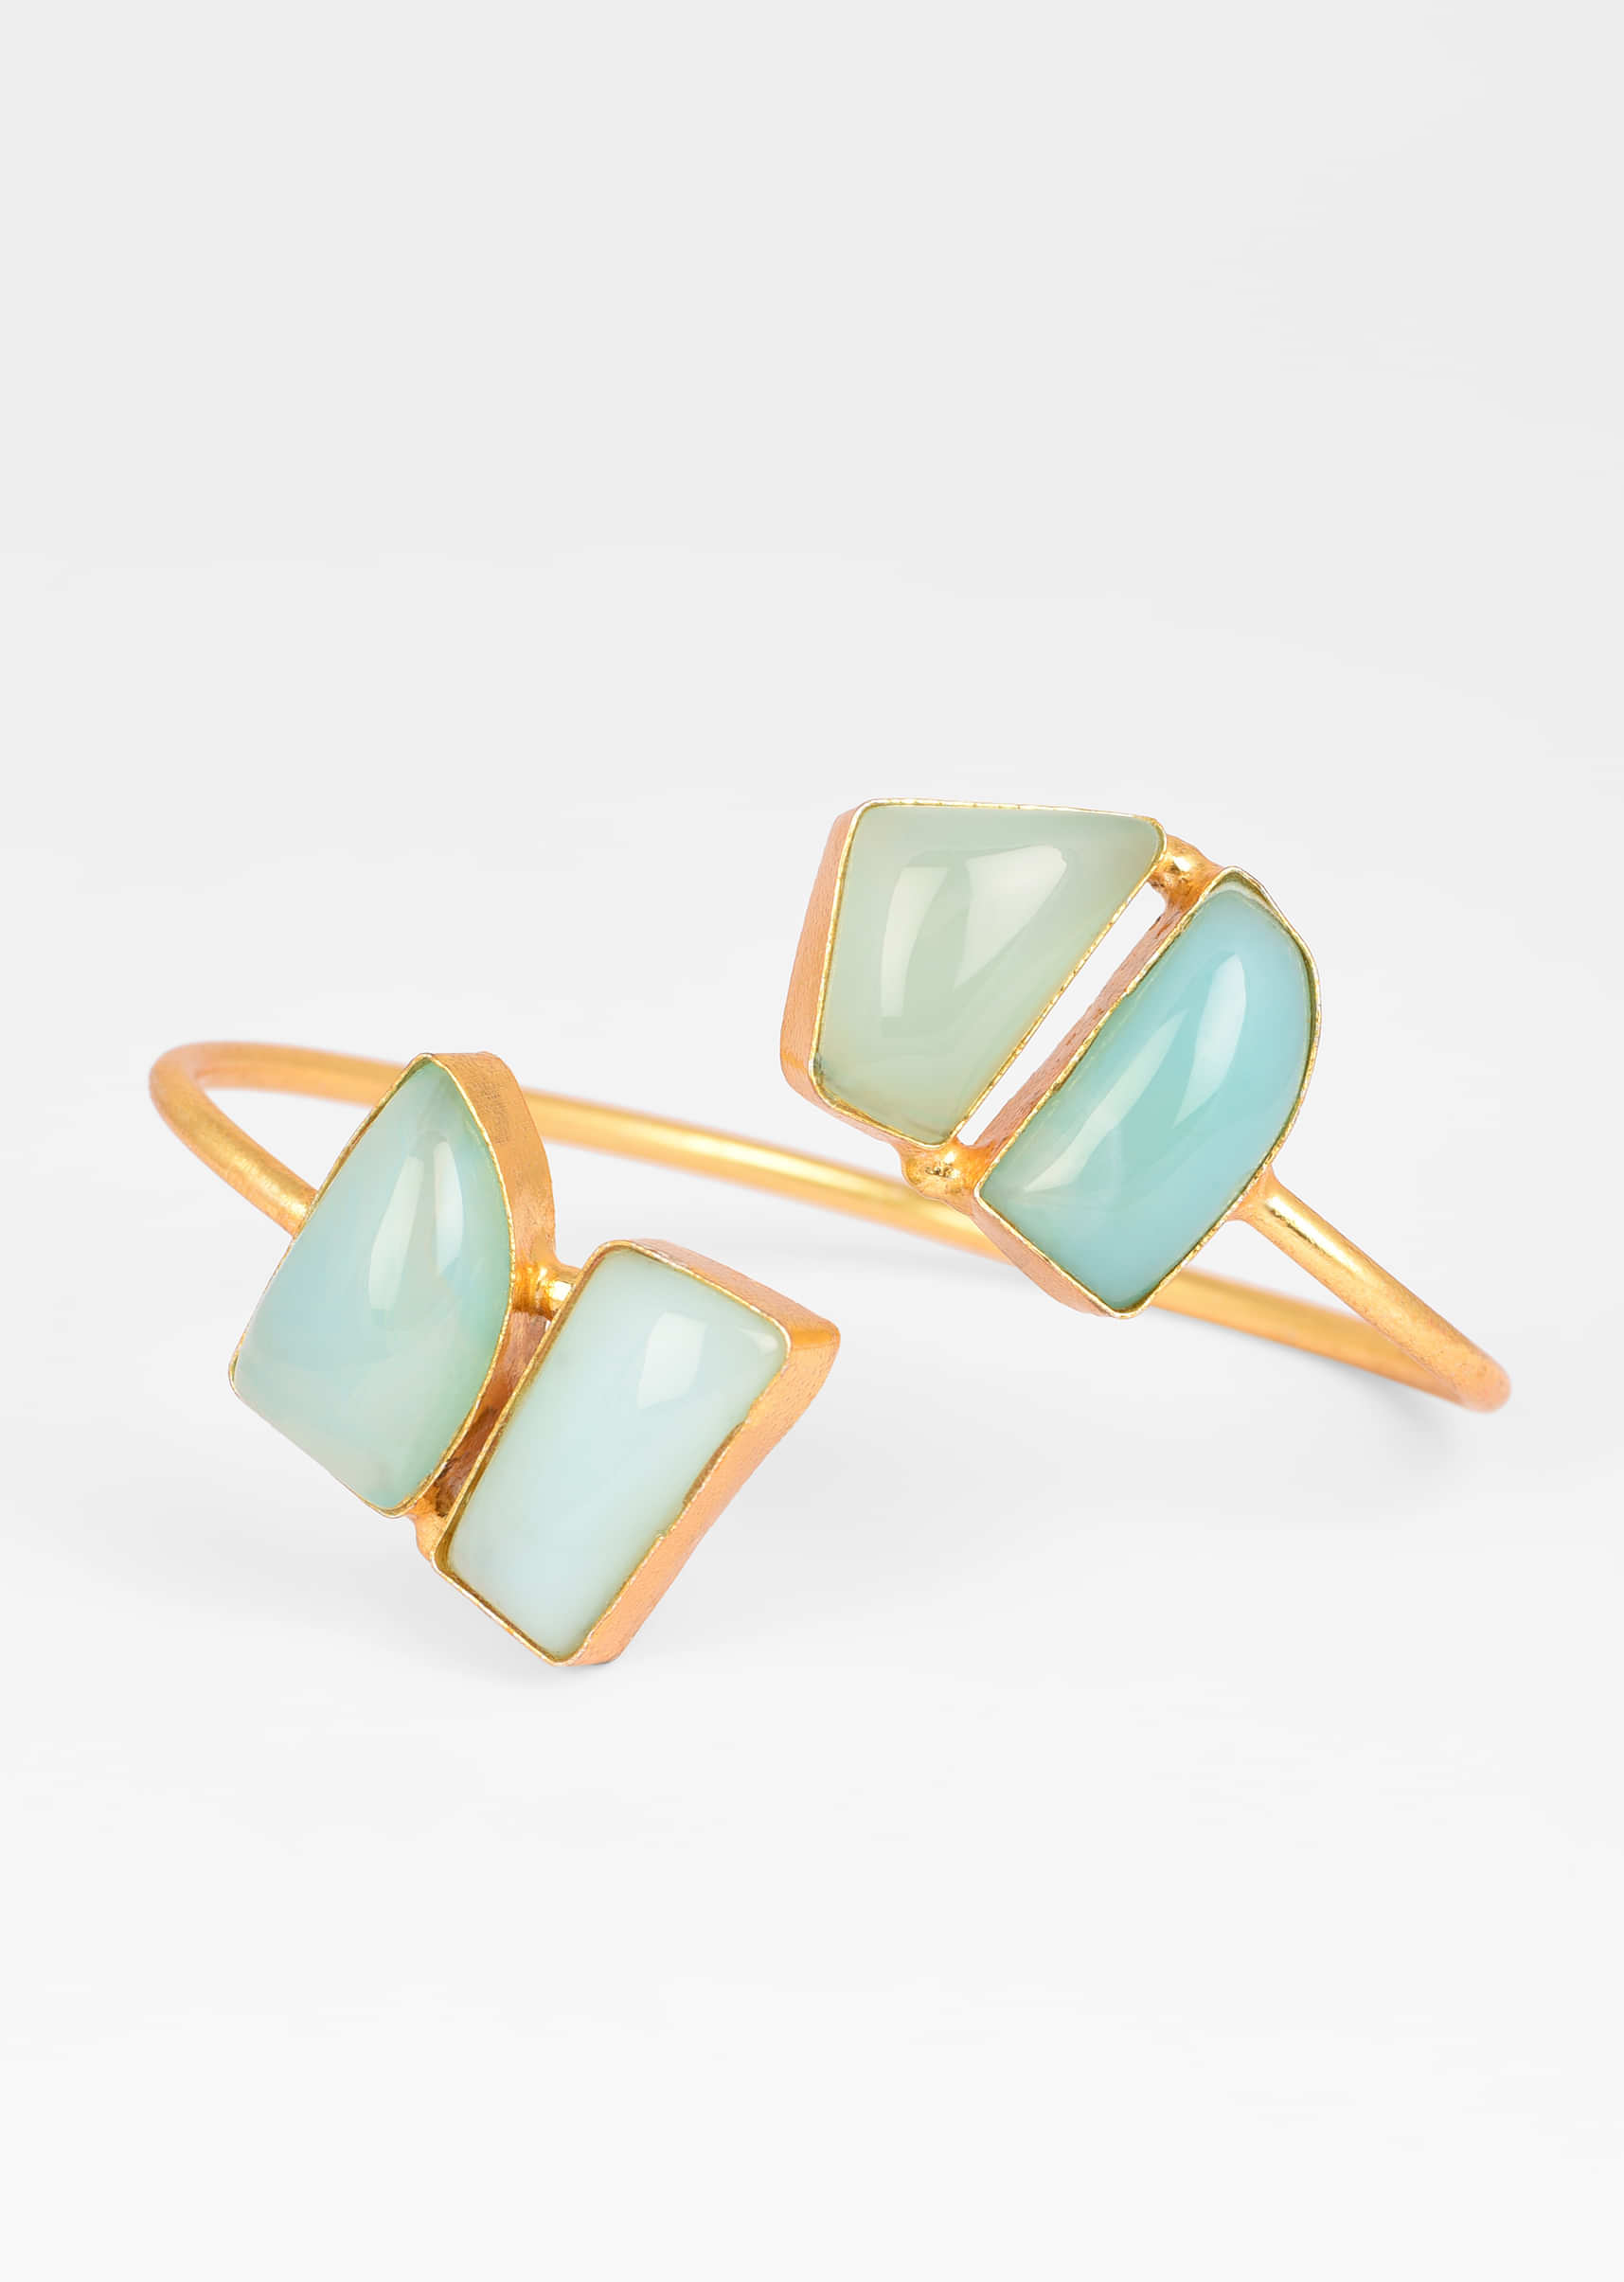 Gold Plated Wrap-Around Bangle With Natural Shaped Sky Blue Colored Semi Precious Stones 